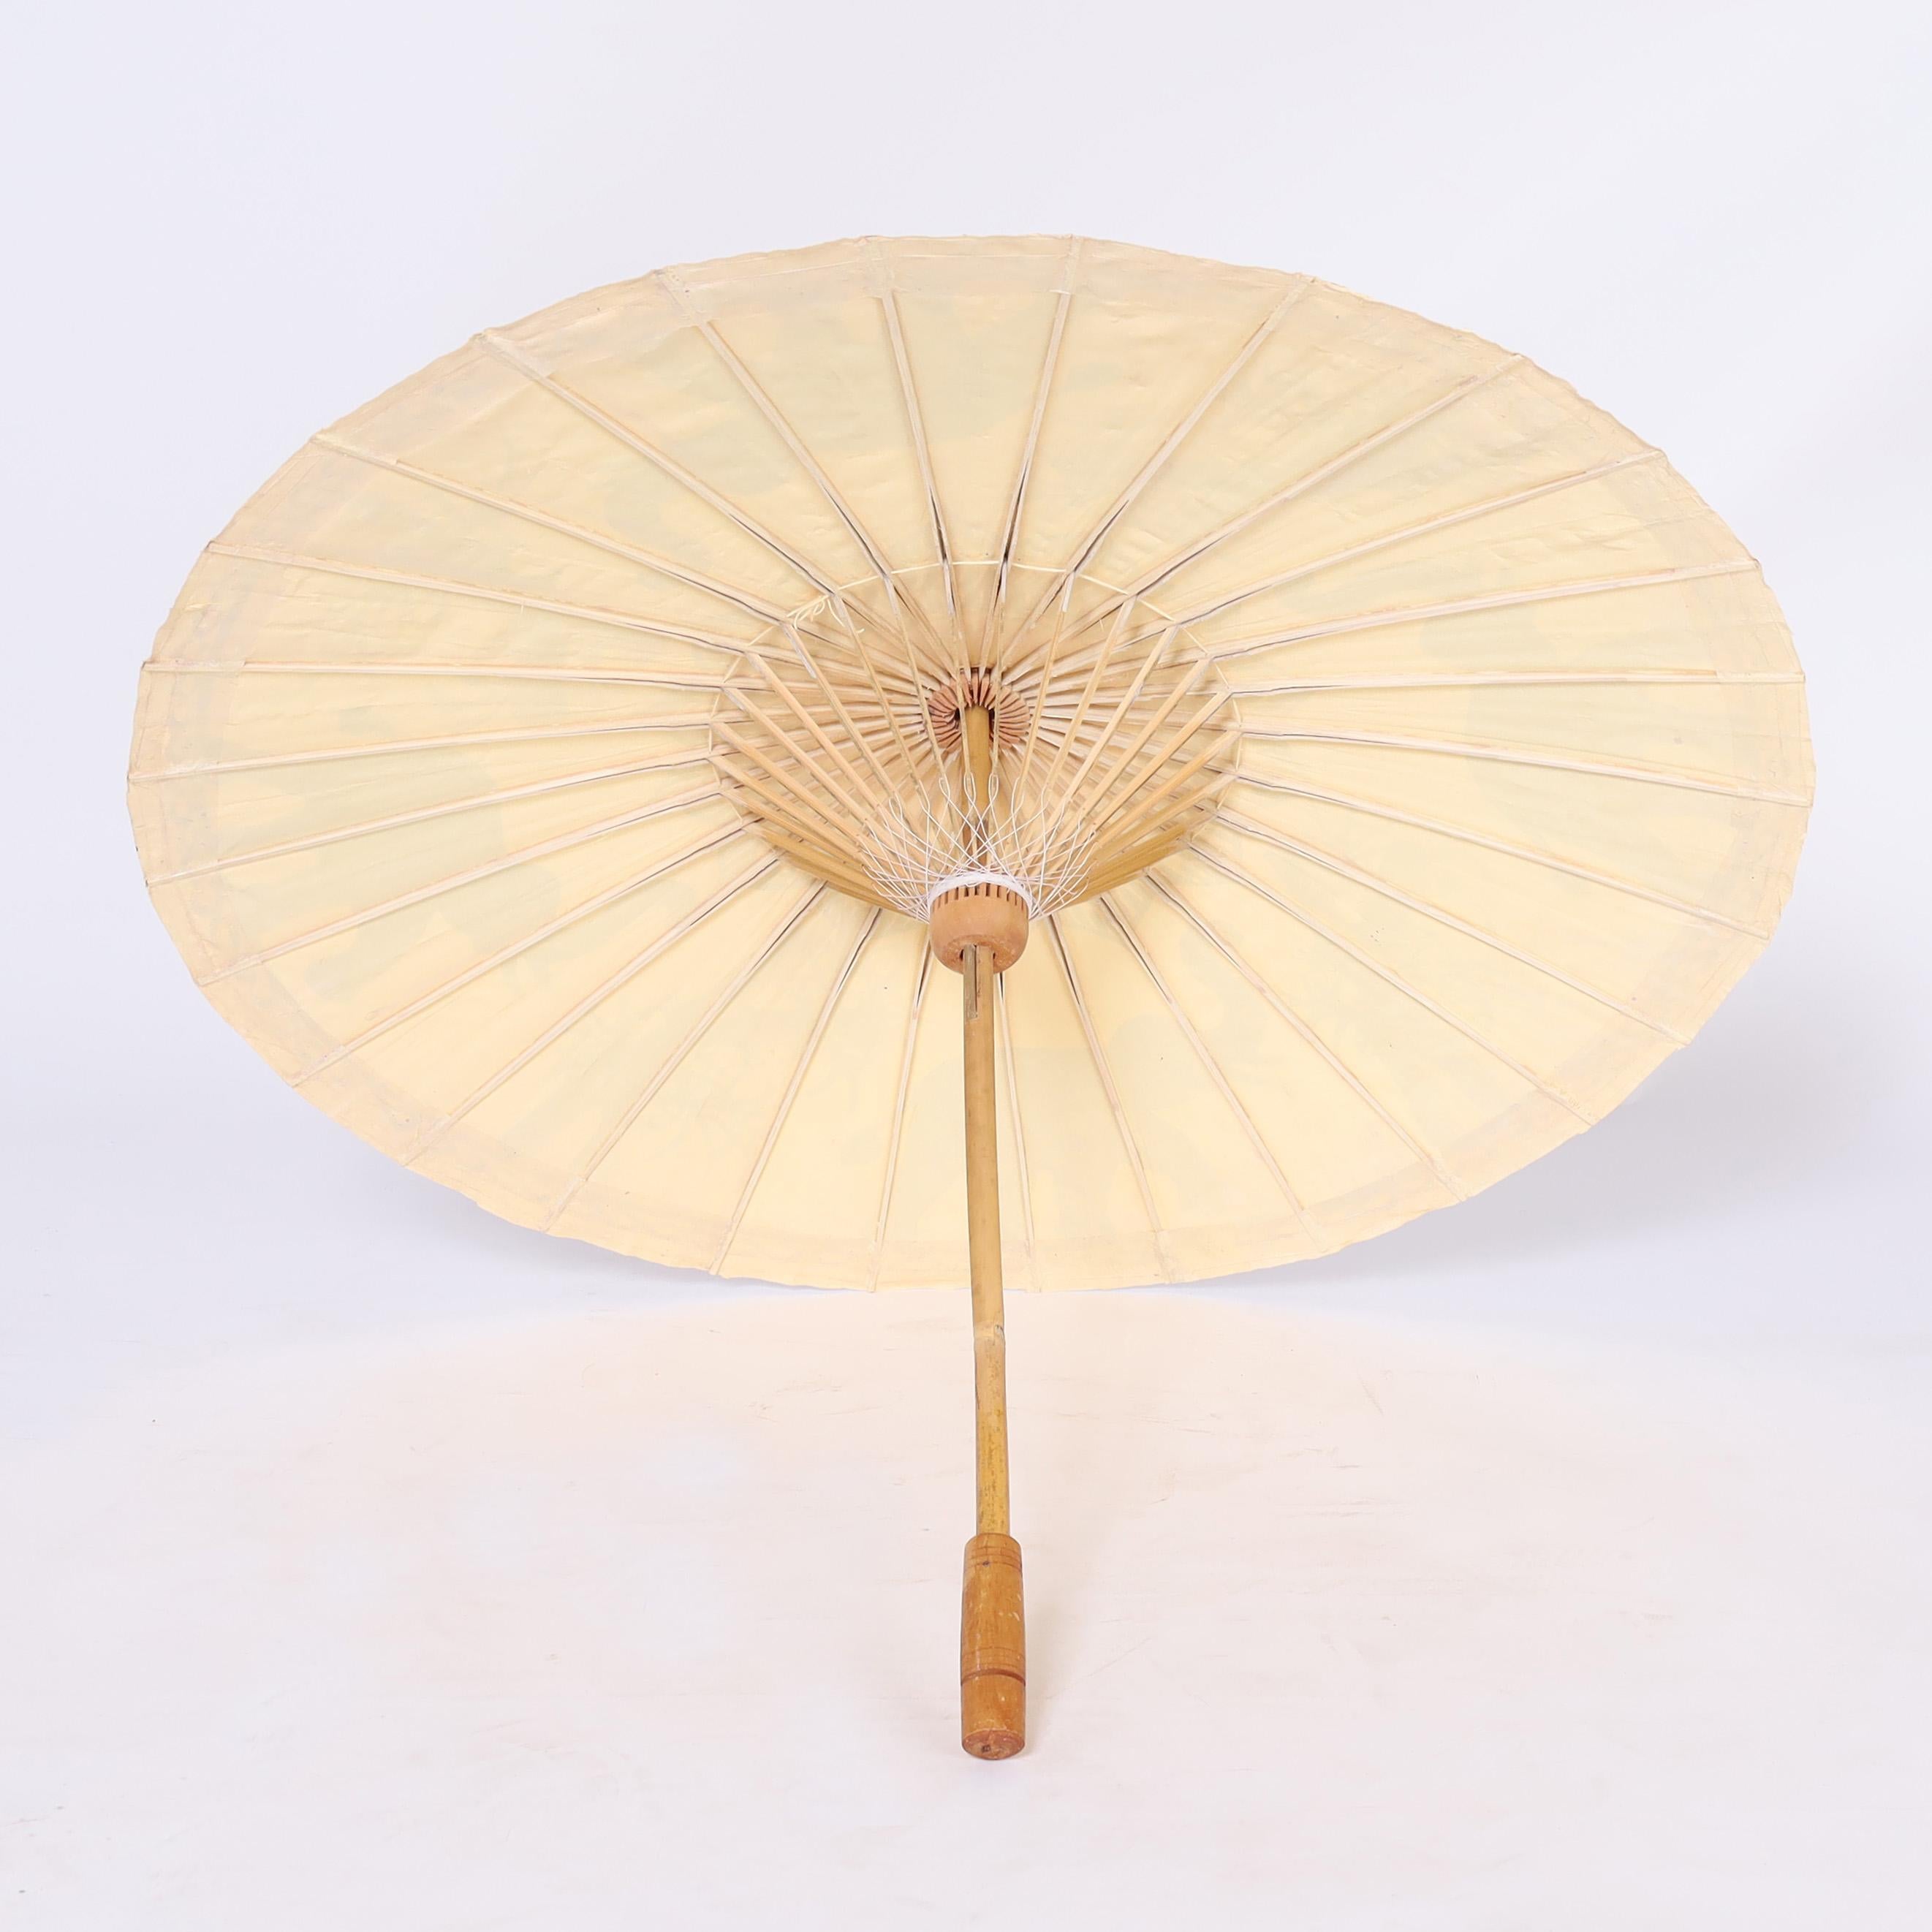 20th Century Asian Painted Parasol with Elephants and Bamboo